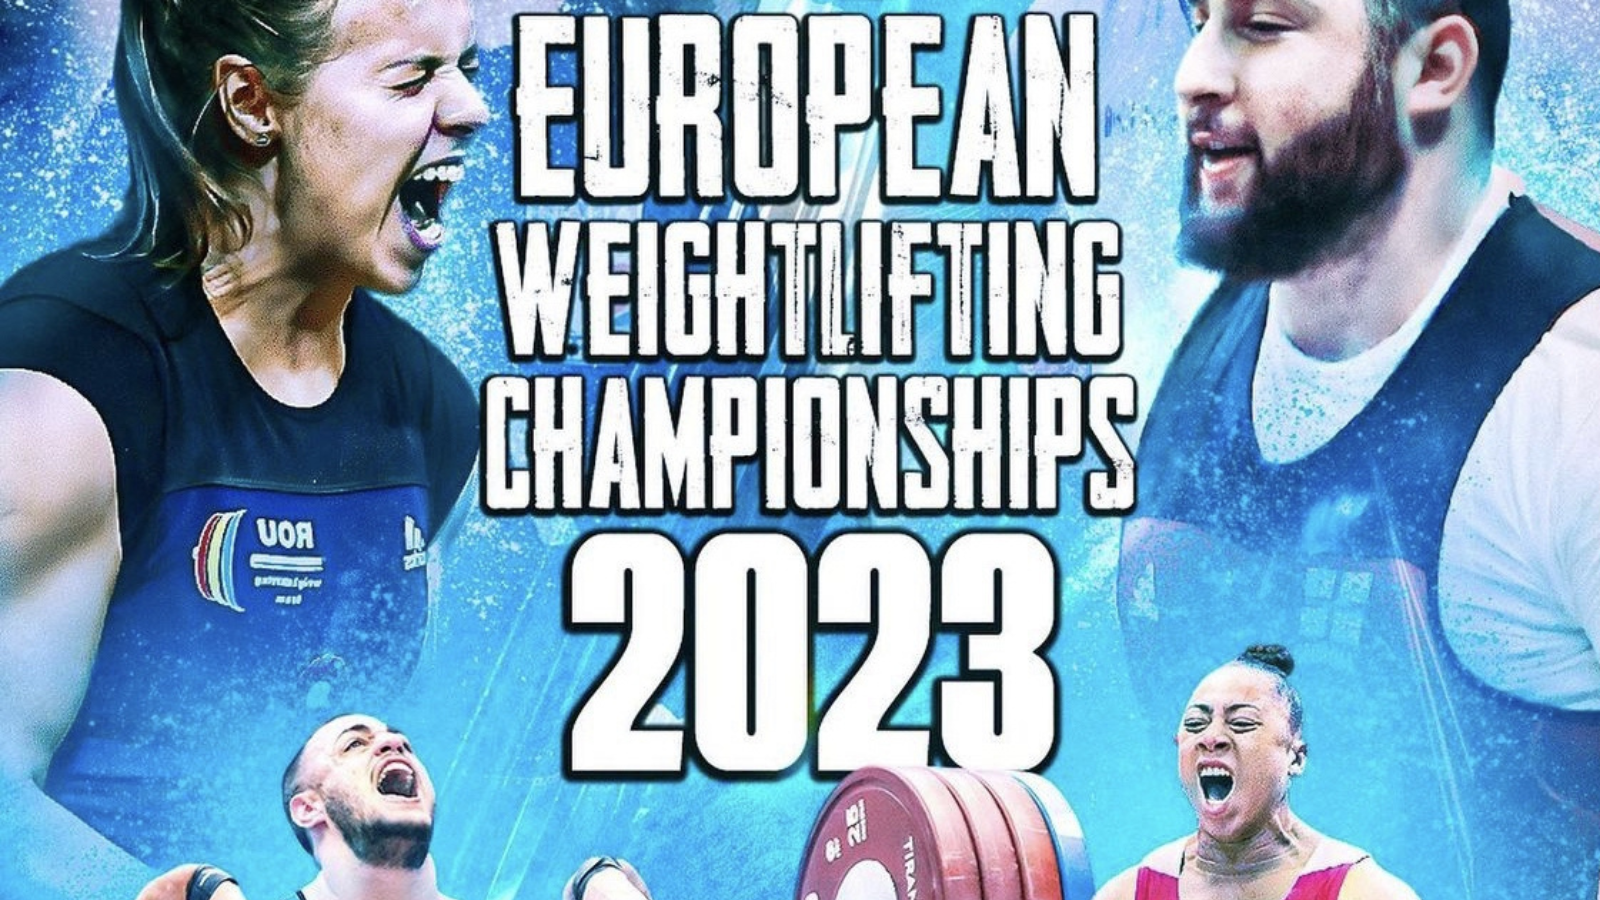 How to Watch the 2023 IWF European Weightlifting Championships BarBend